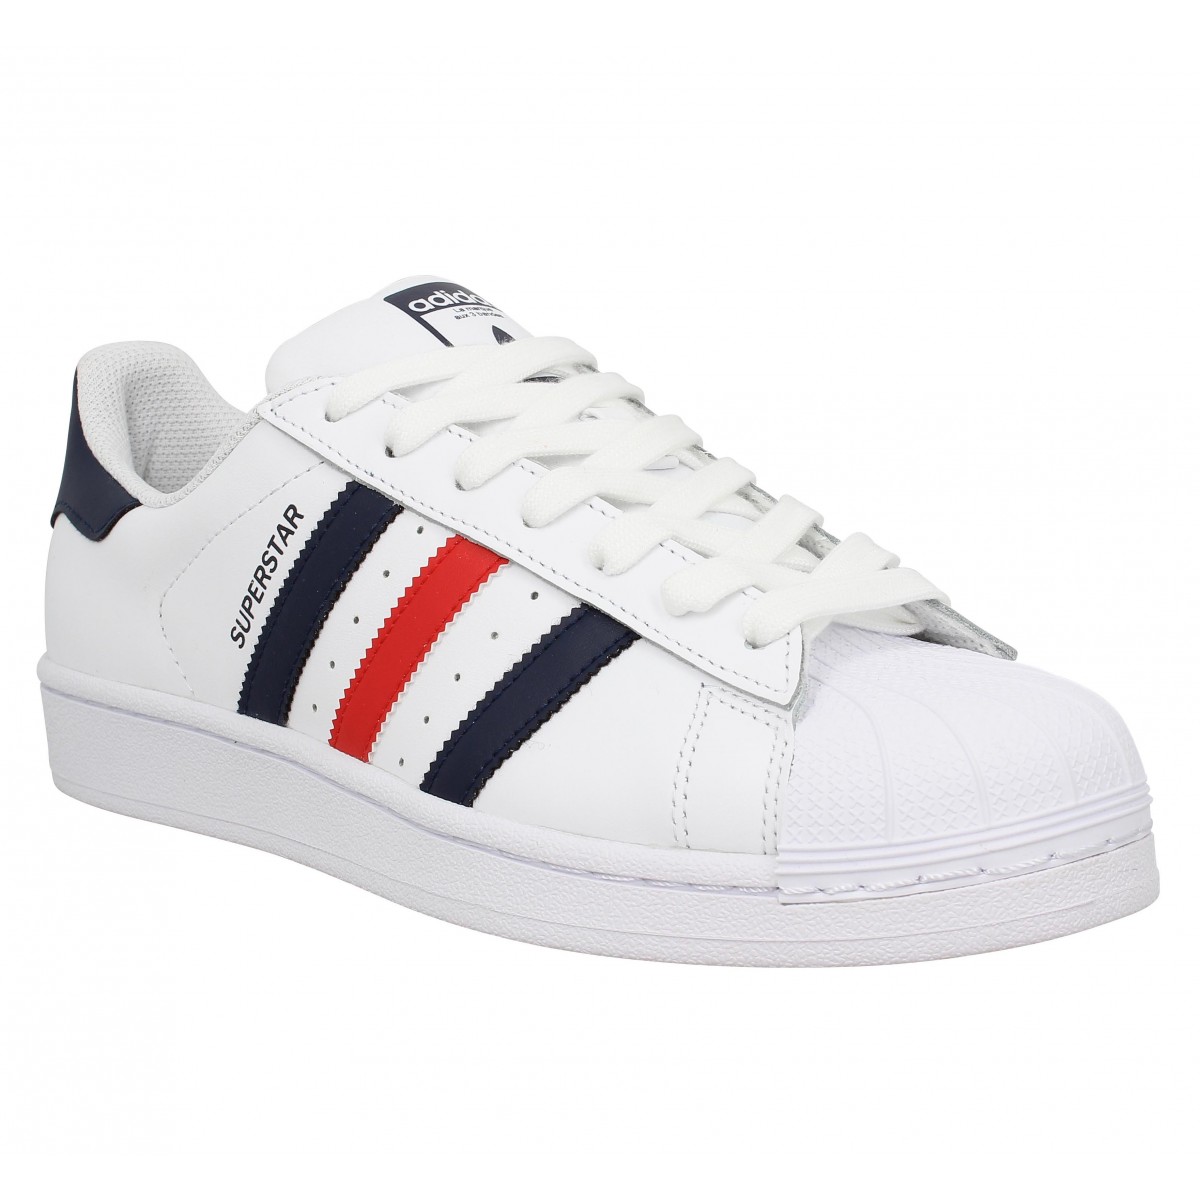 Adidas superstar foundation cuir homme blanc bleu rouge | Fanny chaussures